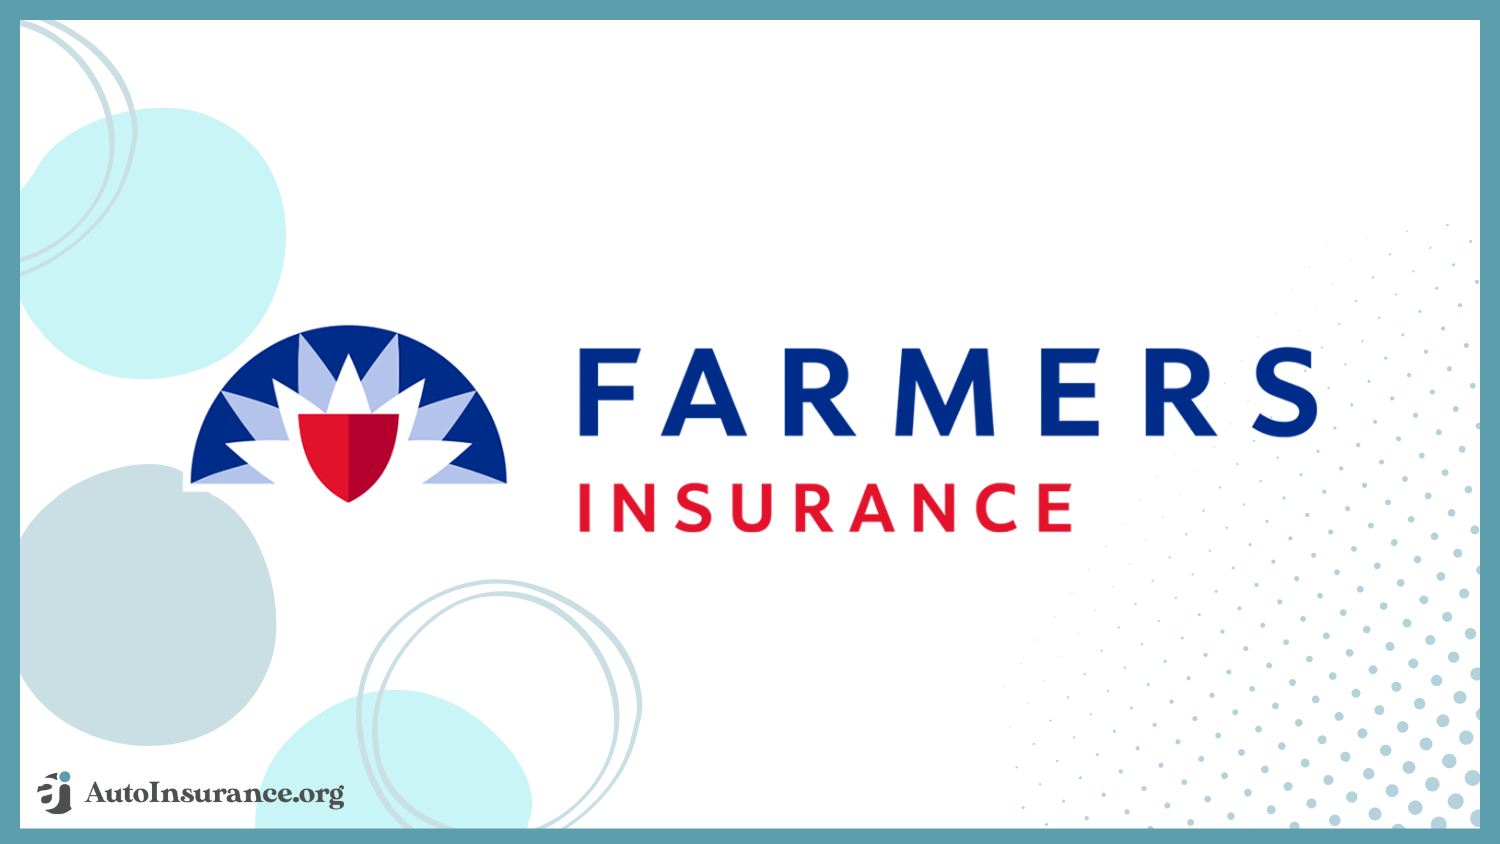 Farmers: Best Auto Insurance Companies That Don't Check Accidents Reported by CARFAX